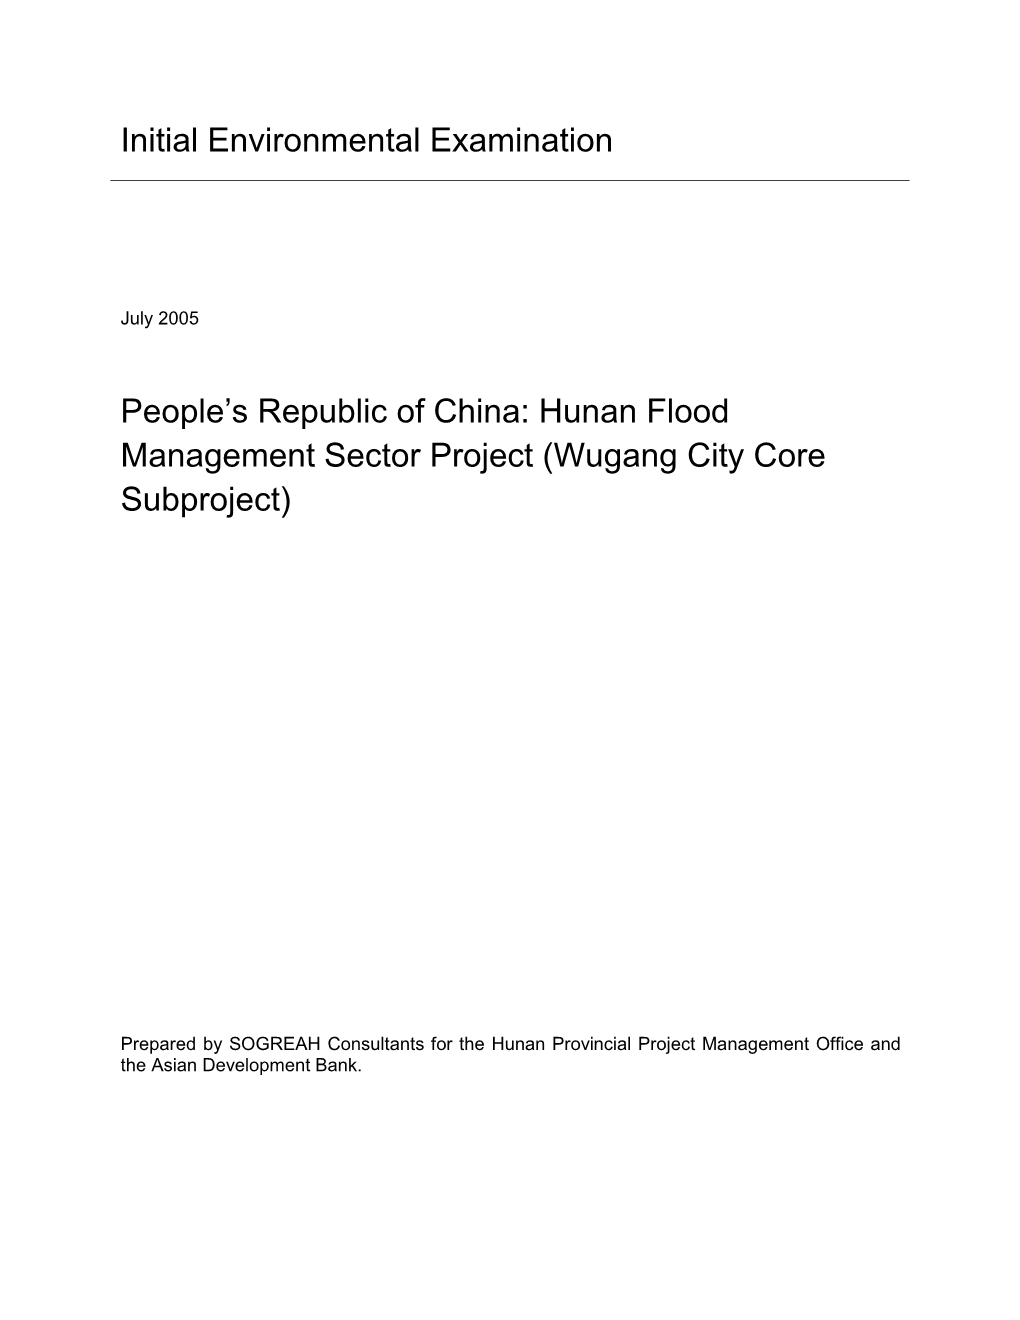 Hunan Flood Management Sector Project (Wugang City Core Subproject)